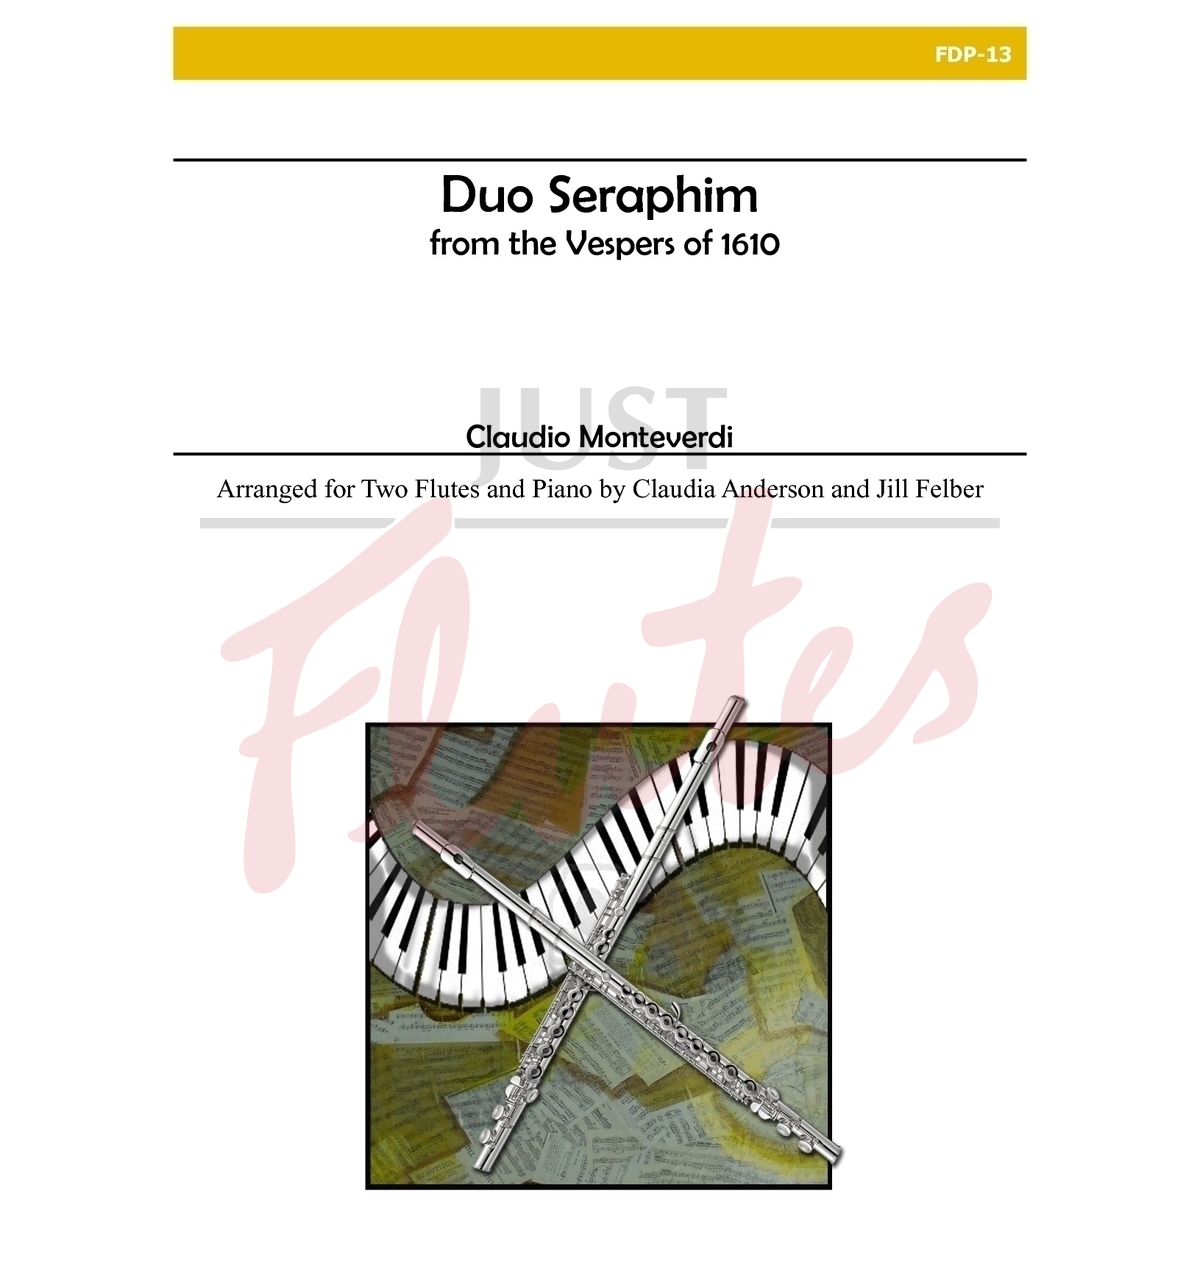 Duo Seraphim from the Vespers of 1610 for Two Flutes and Piano